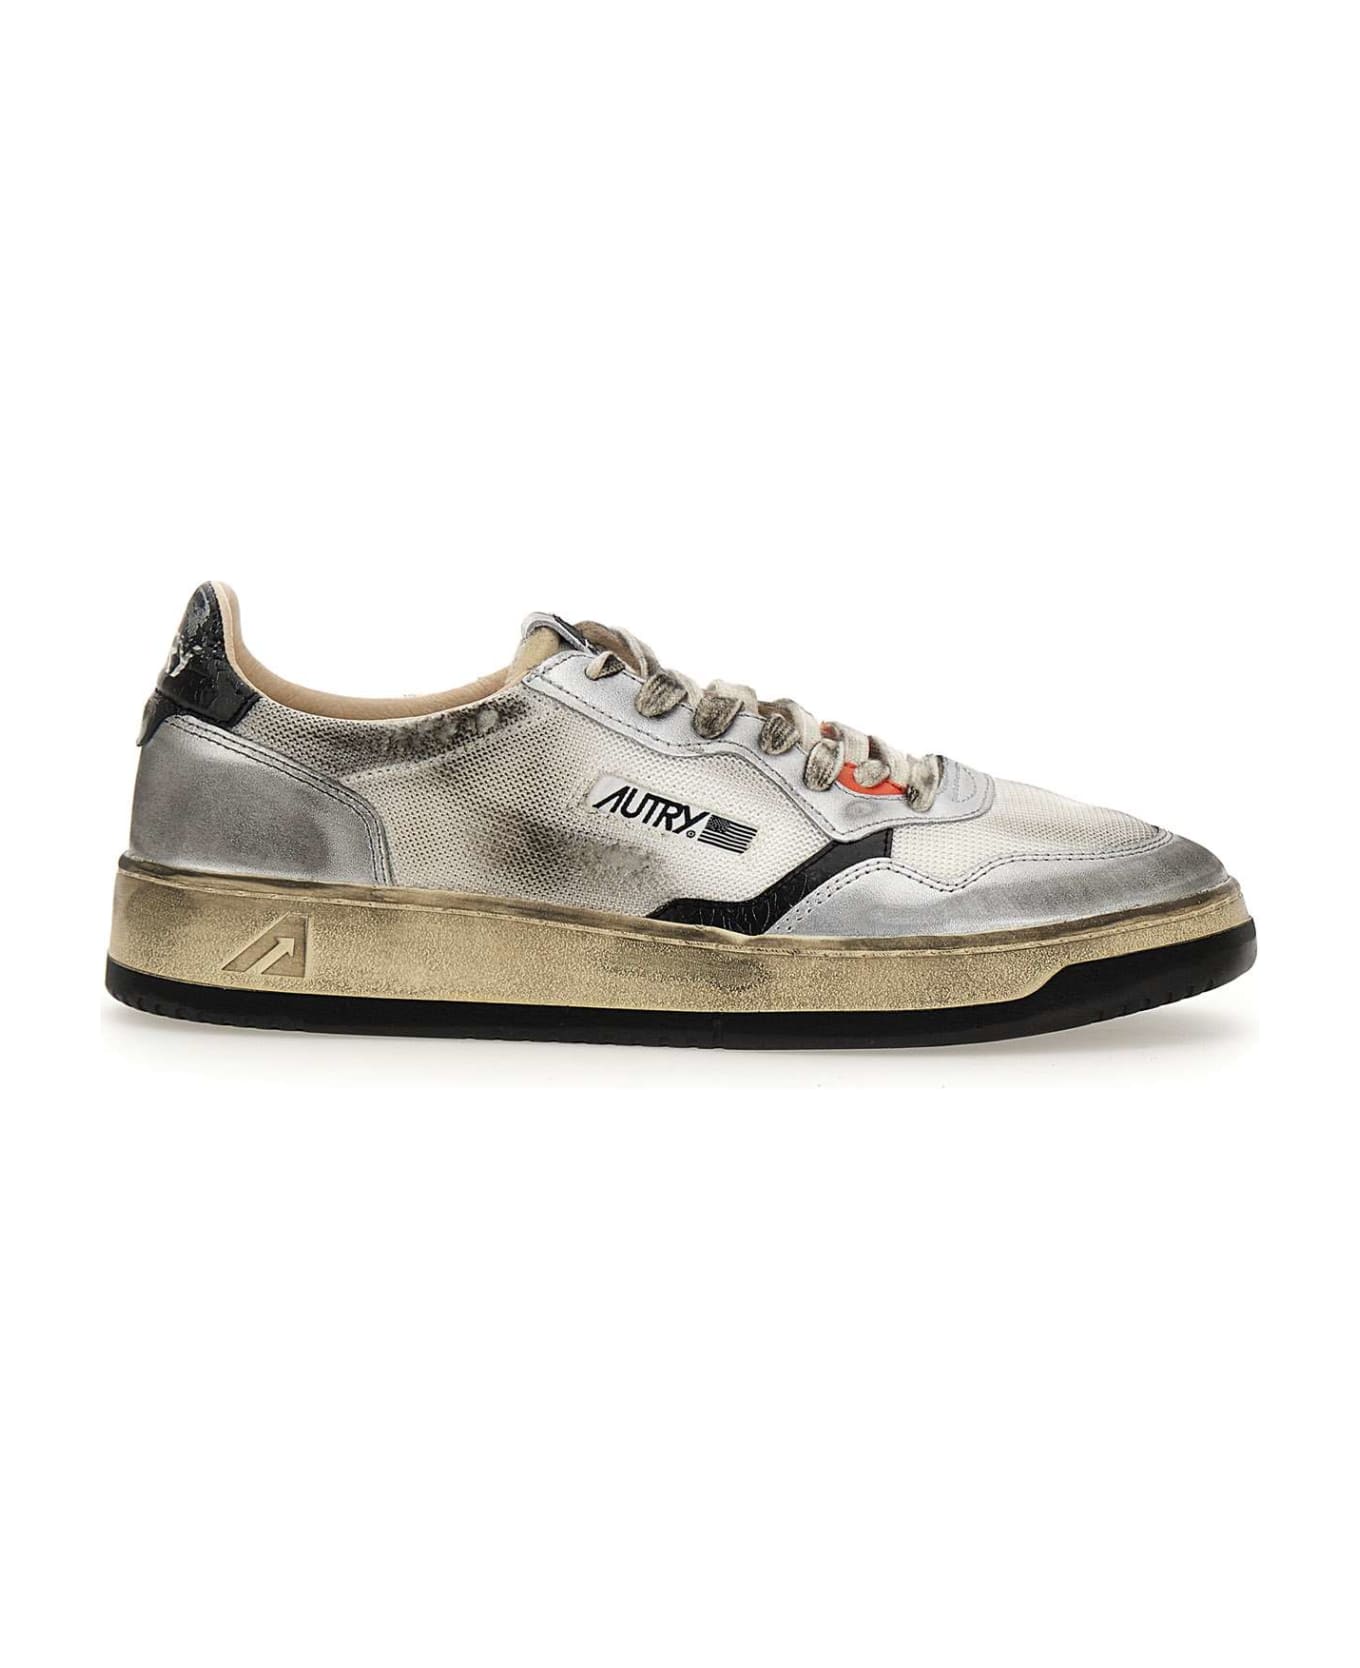 Autry "avlm Ms13" Sneakers - SILVER-white